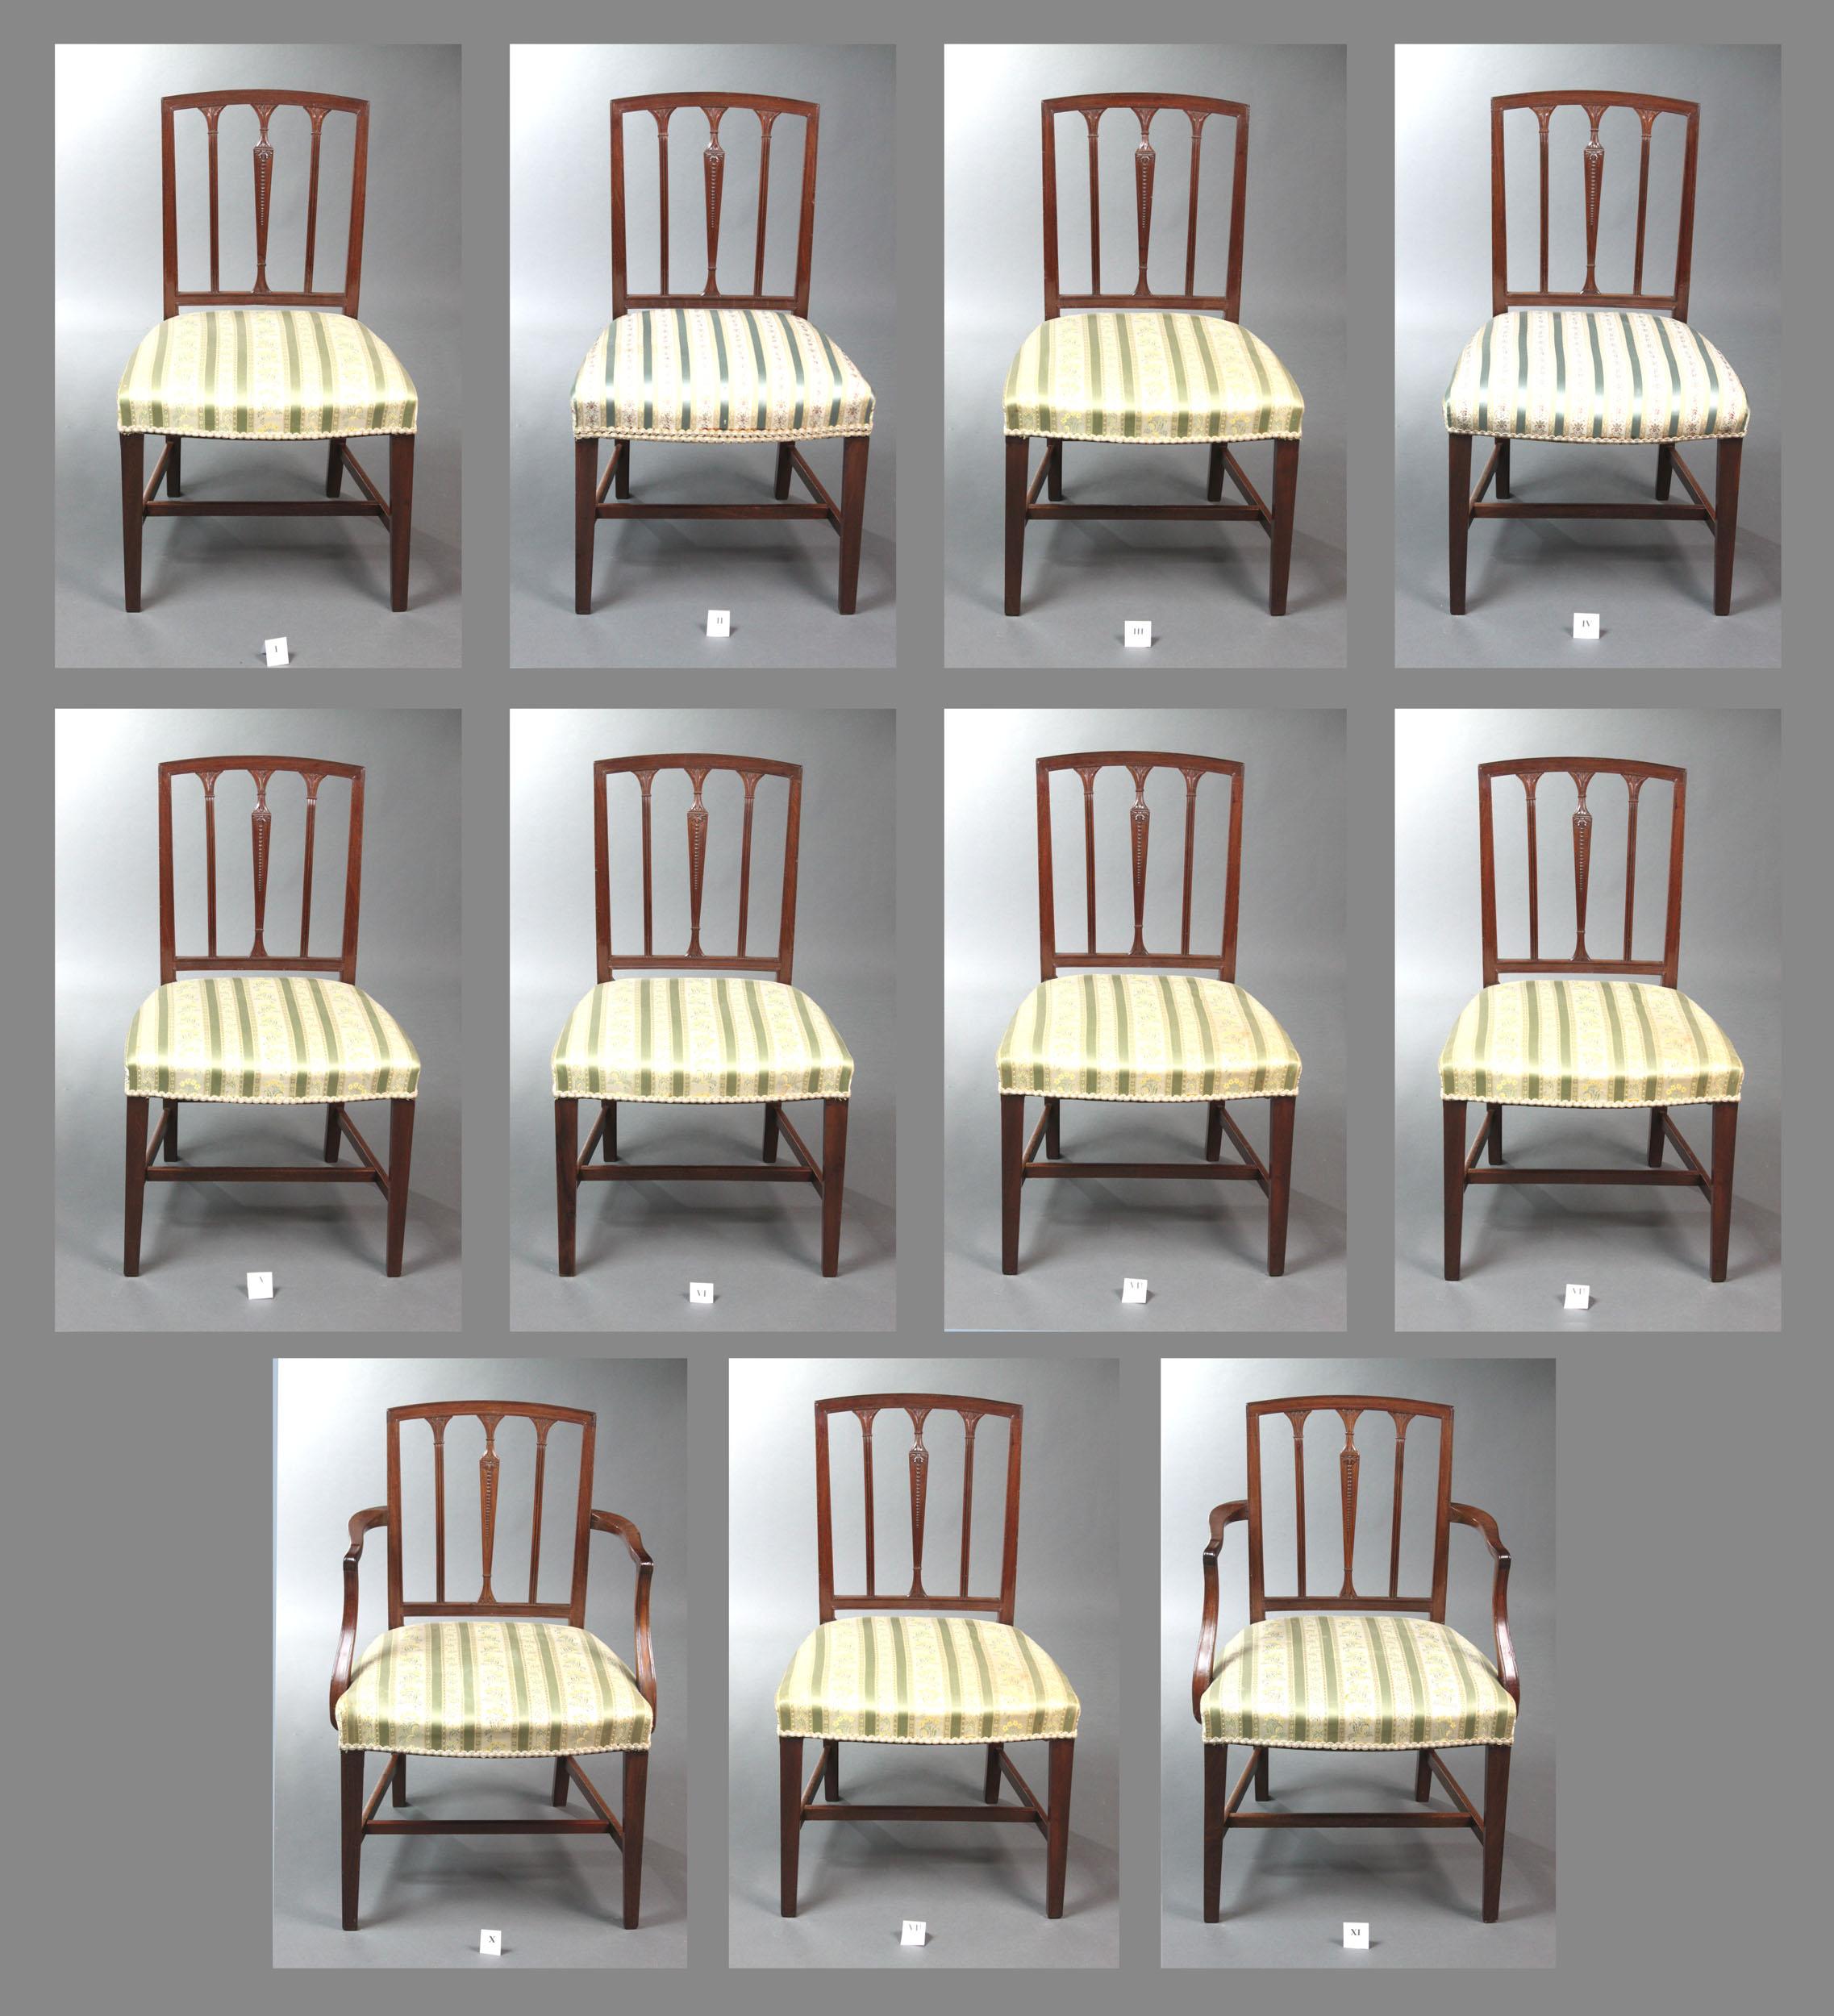 A good set of eleven George III Sheraton period mahogany dining chairs of a good colour and patina: the backs inset with three well carved spindles, square tapered legs joined by H-stretchers.

Covered in two similar fabrics.

Gillow Furniture